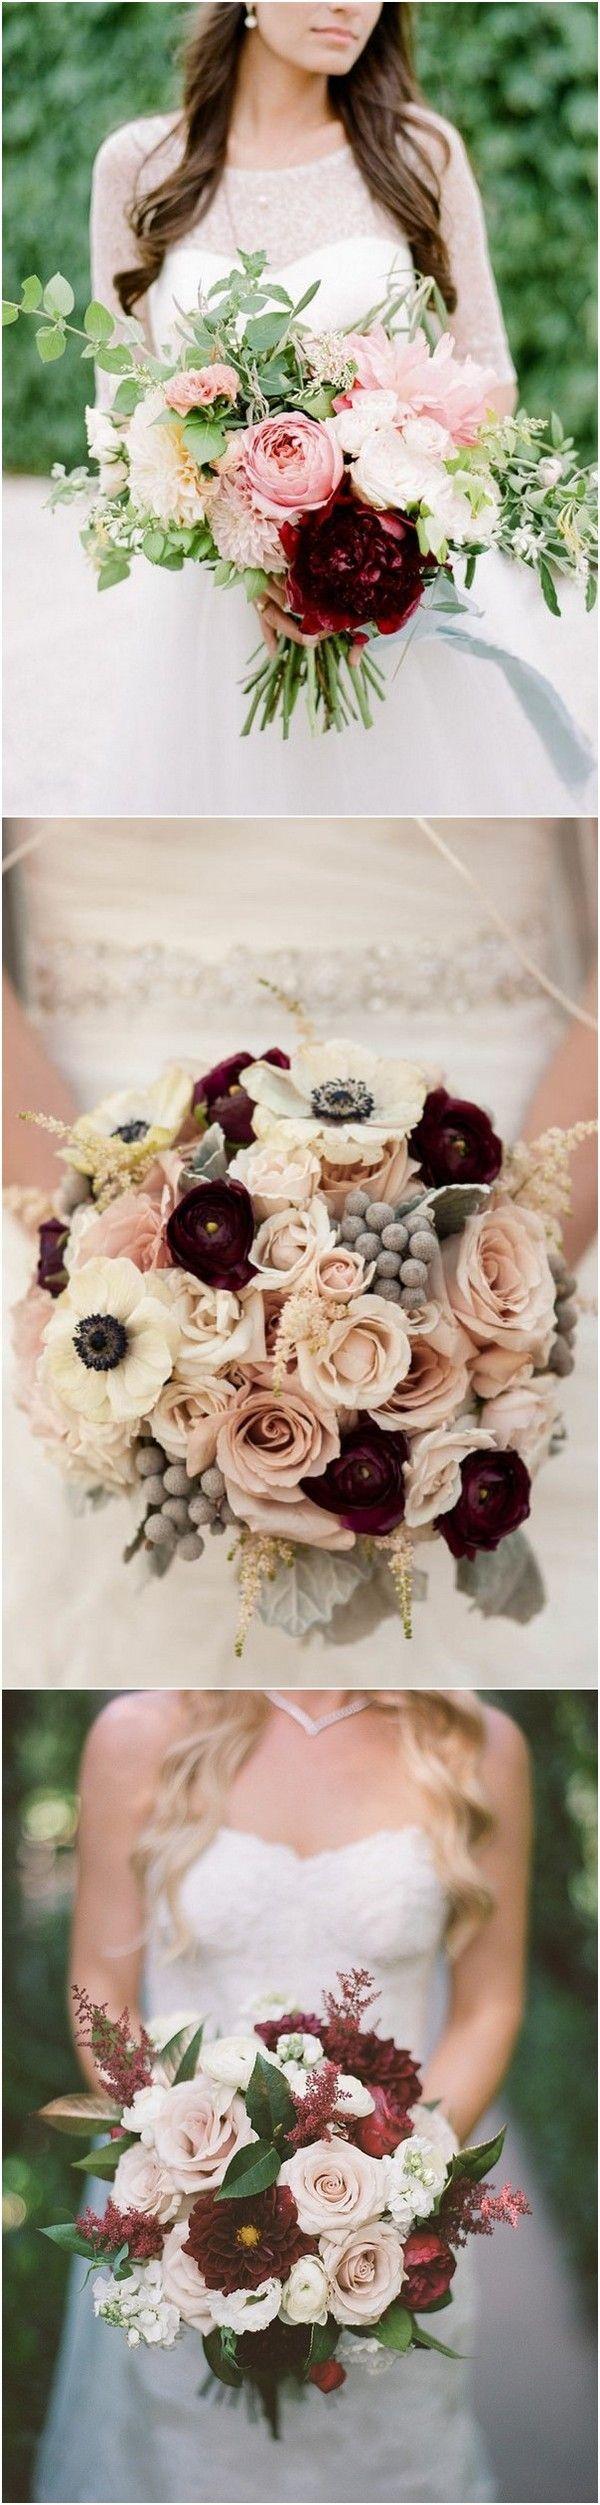 Wedding - Trending-15 Gorgeous Burgundy And Blush Wedding Bouquet Ideas - Page 3 Of 3